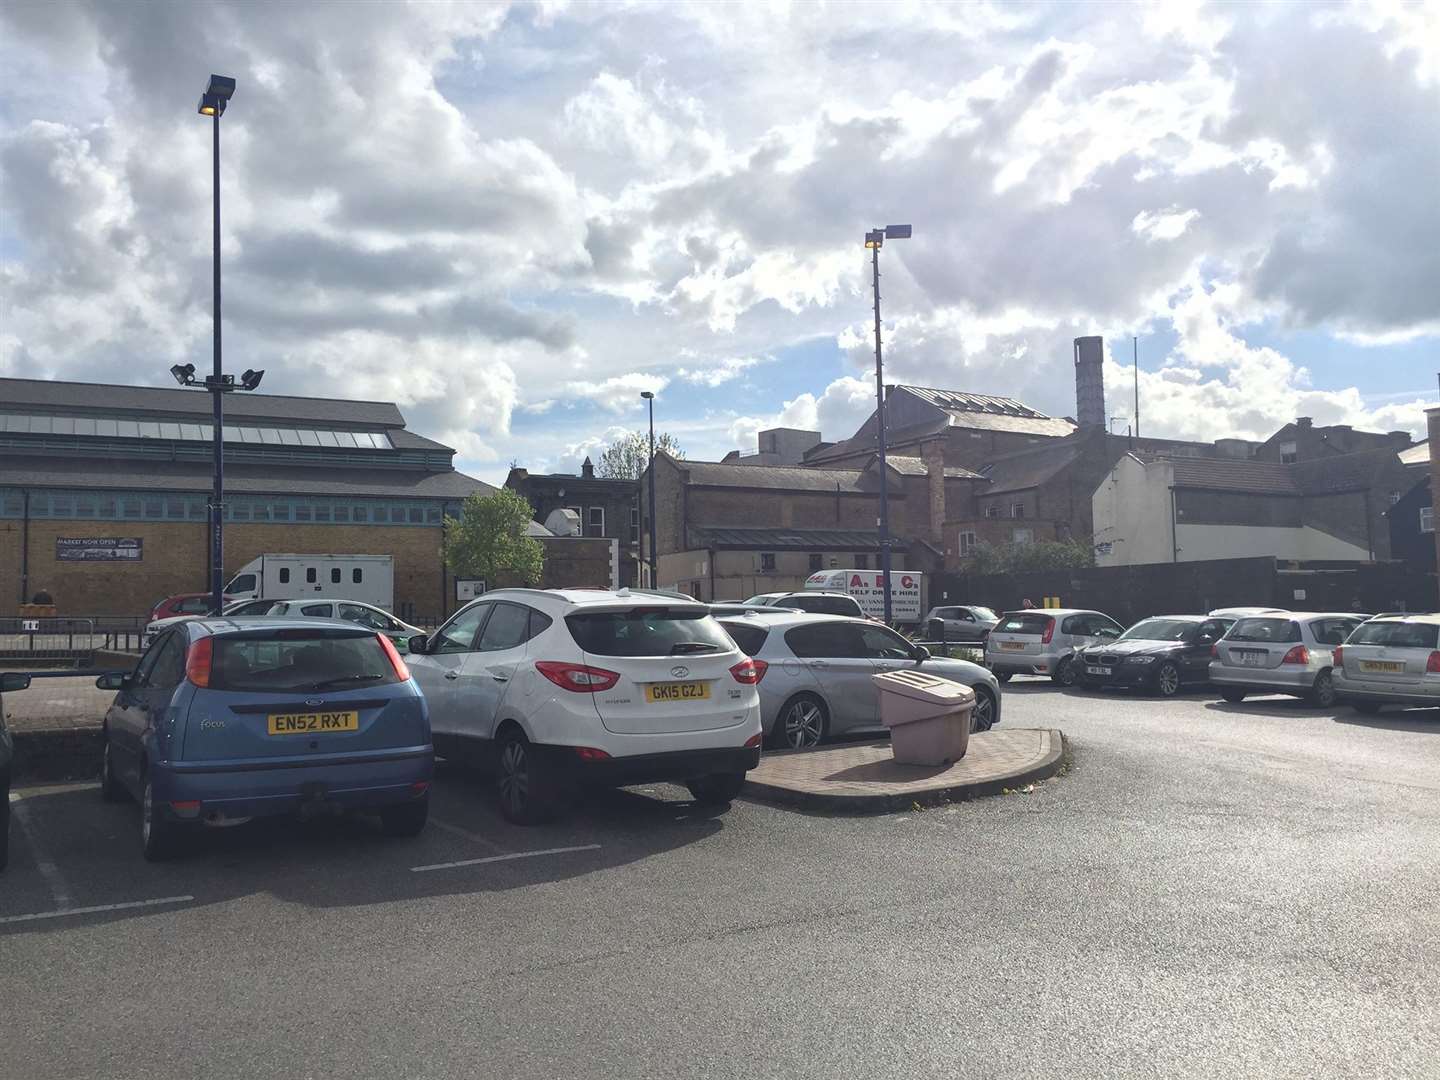 Gravesham council had a shortfall of £243,000 in car parks income